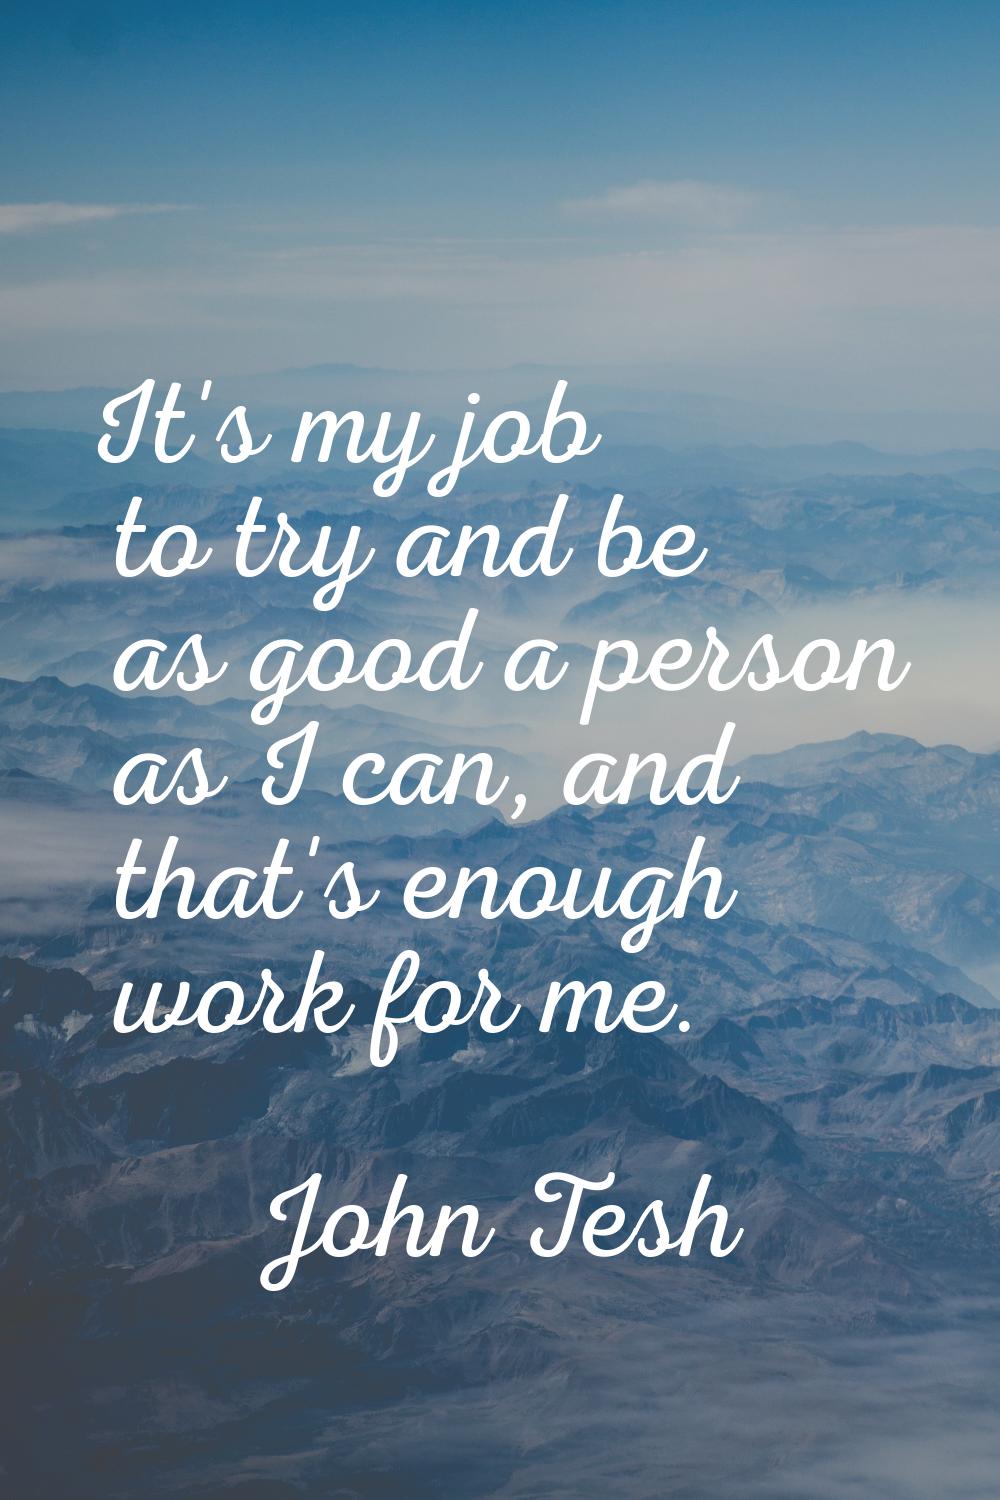 It's my job to try and be as good a person as I can, and that's enough work for me.